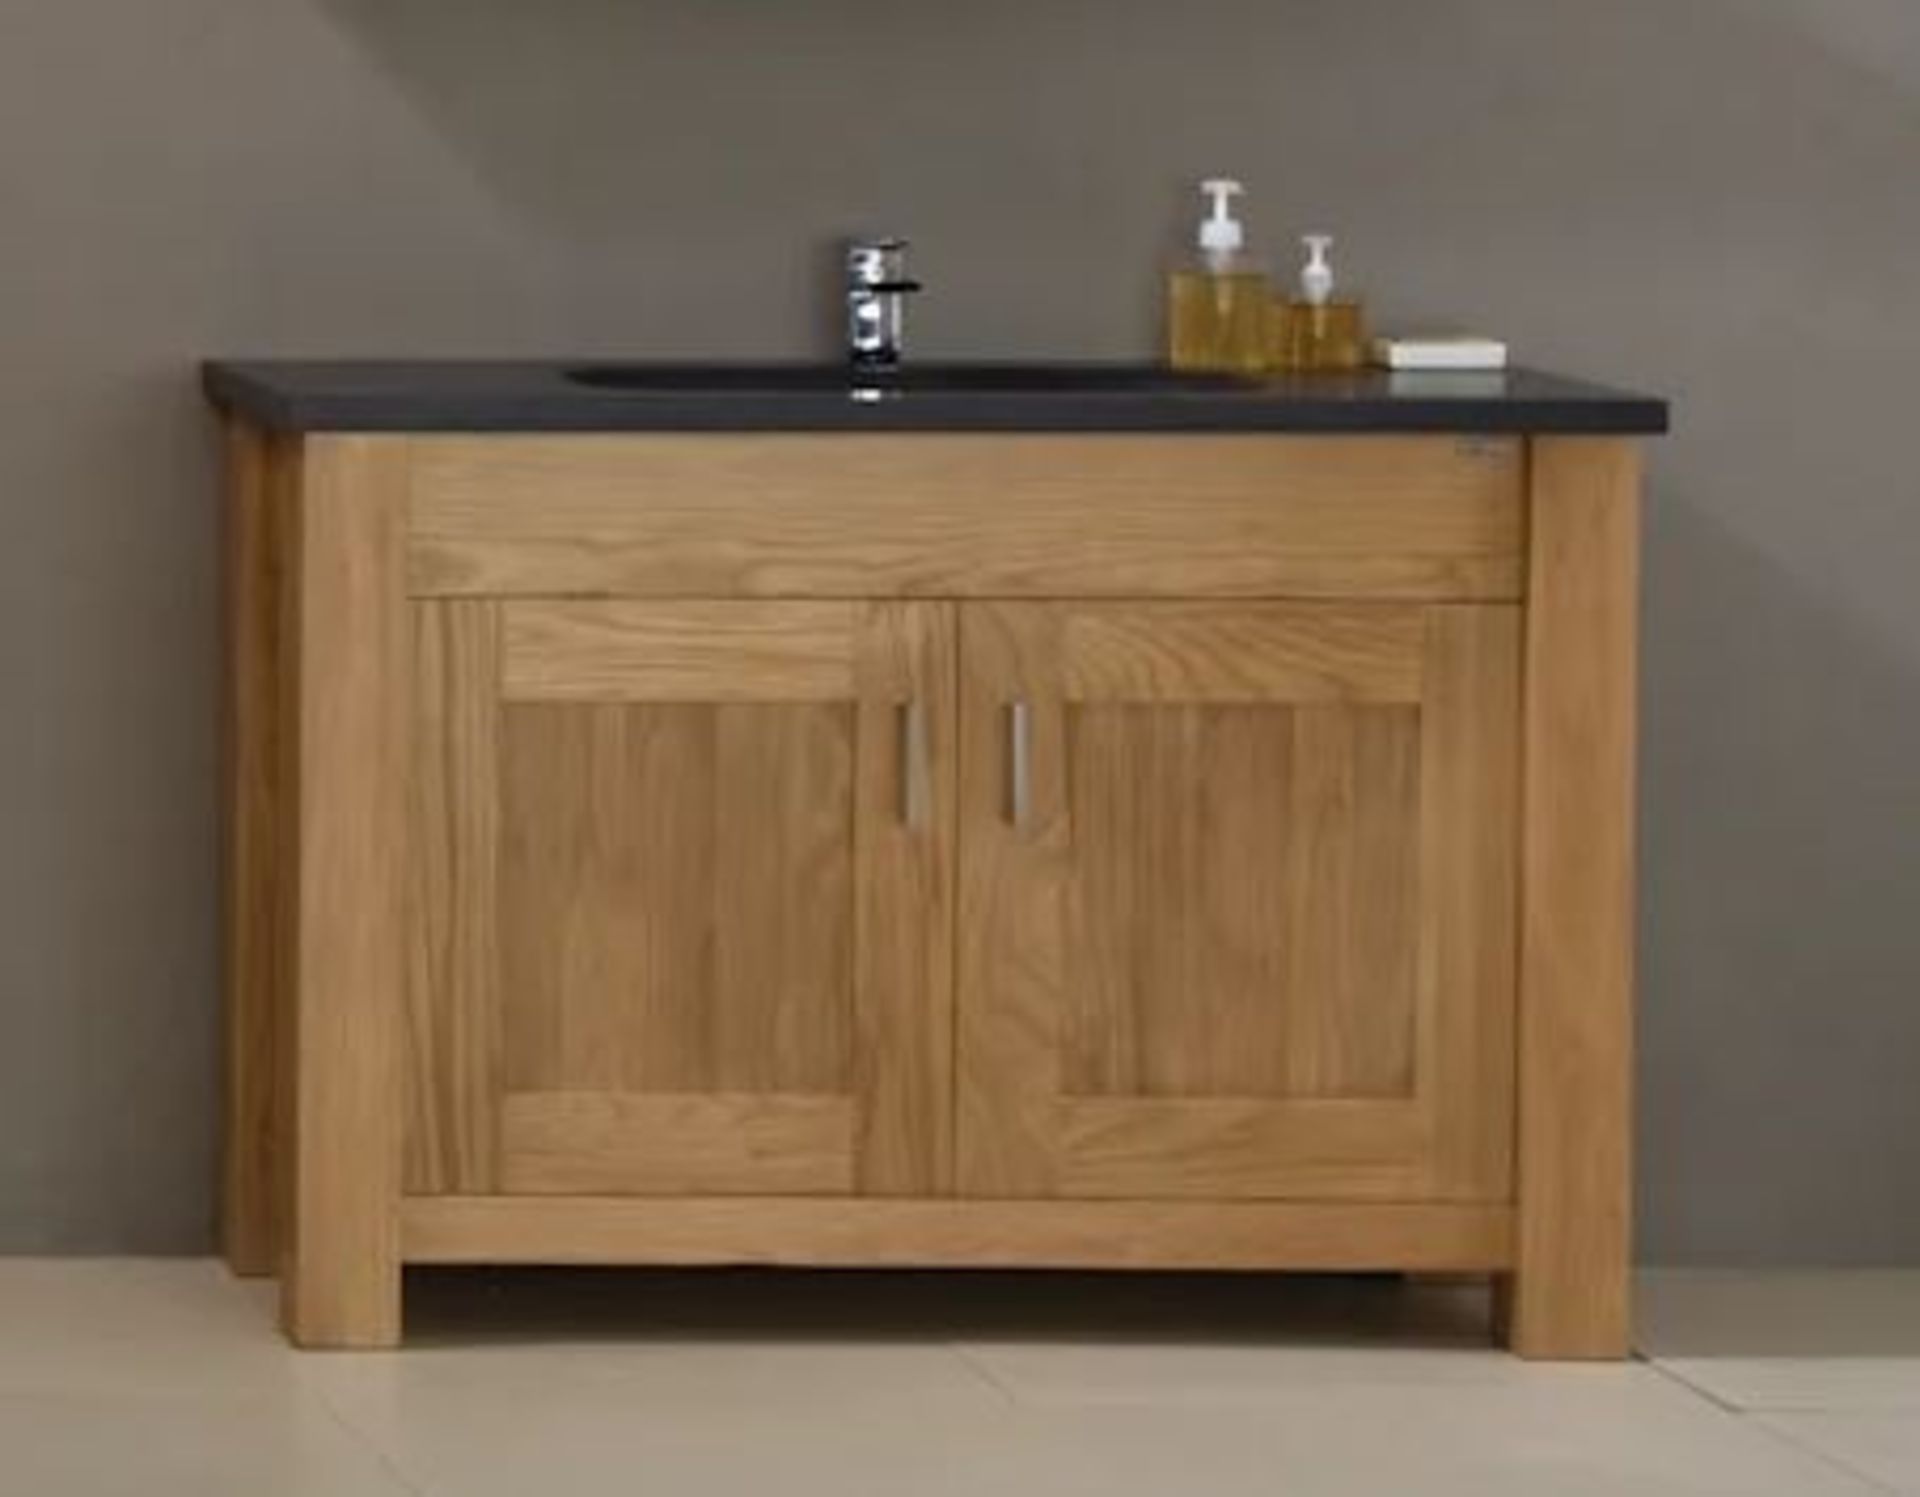 4 x Stonearth 'Finesse' Countertop Washstands - American Solid Oak - Original RRP £5,600 - Image 18 of 22